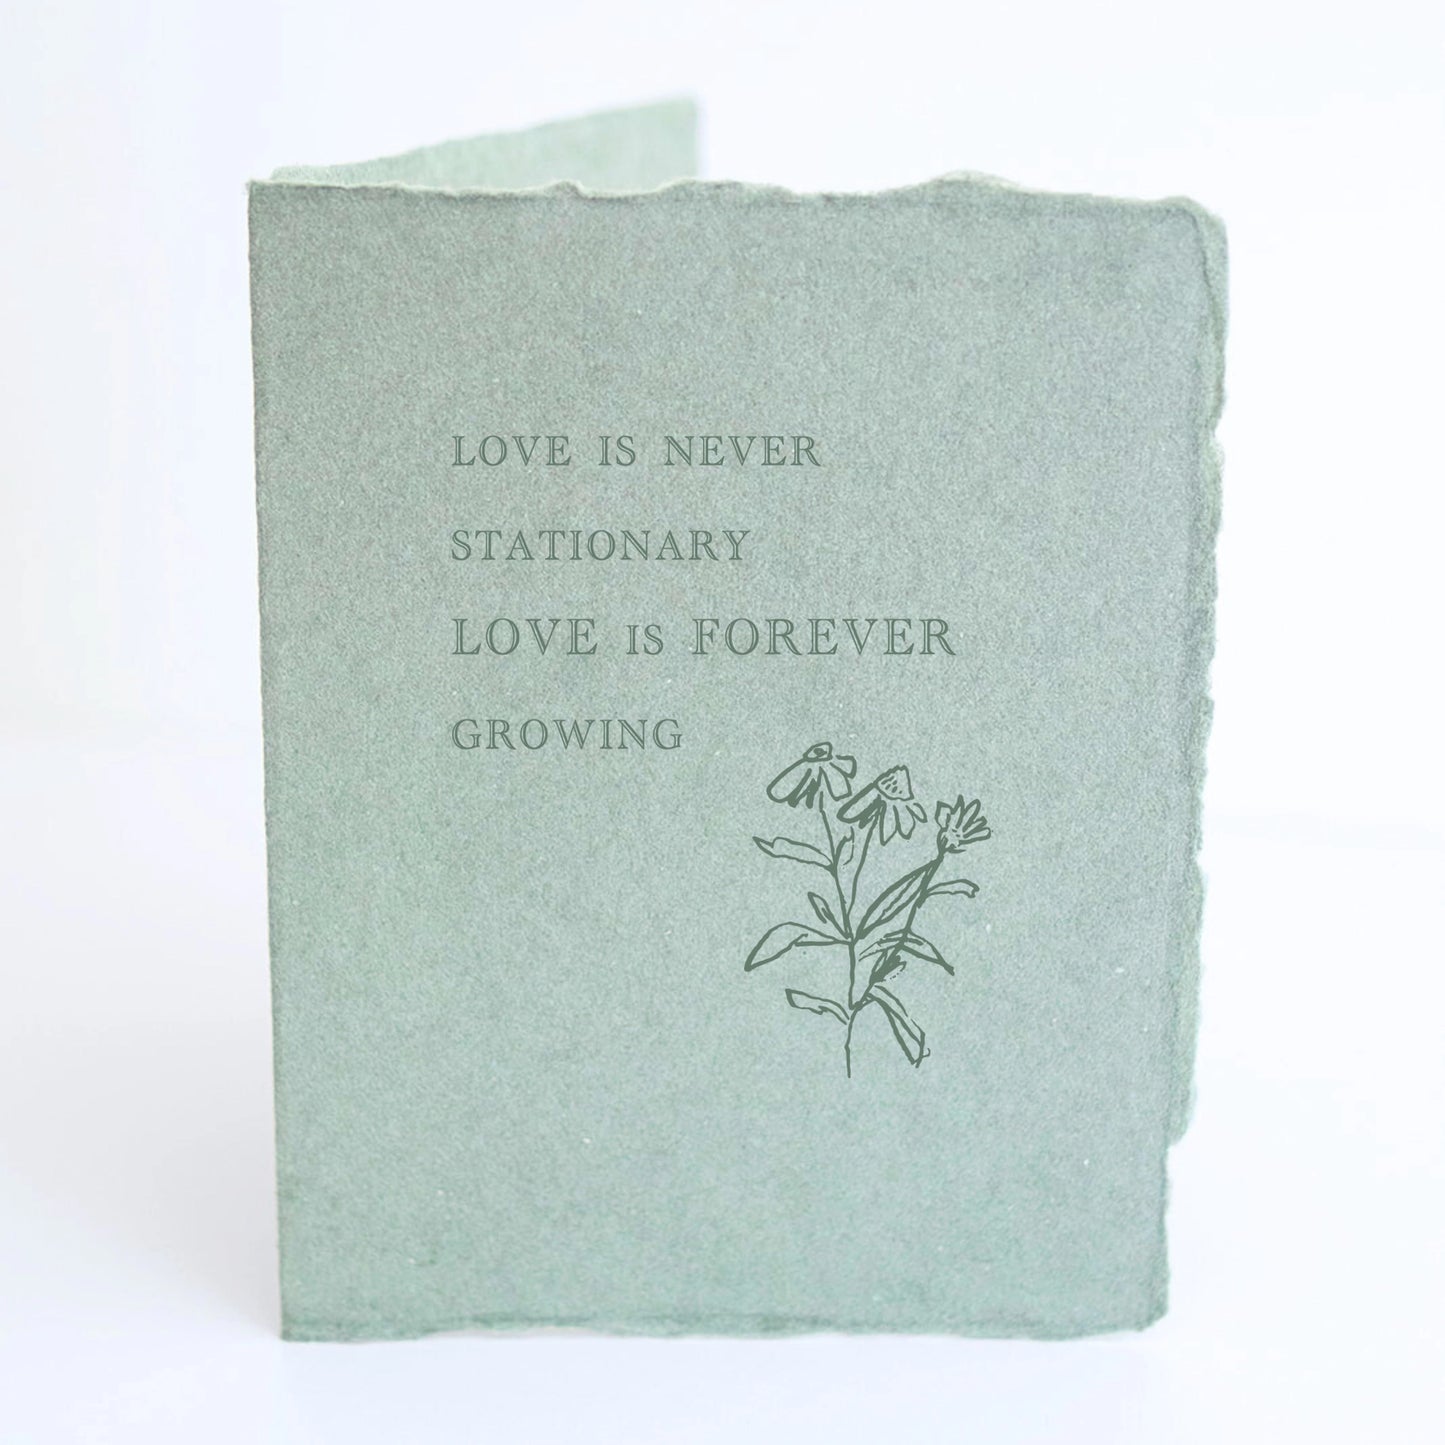 "Love Is Never Stationary" Card